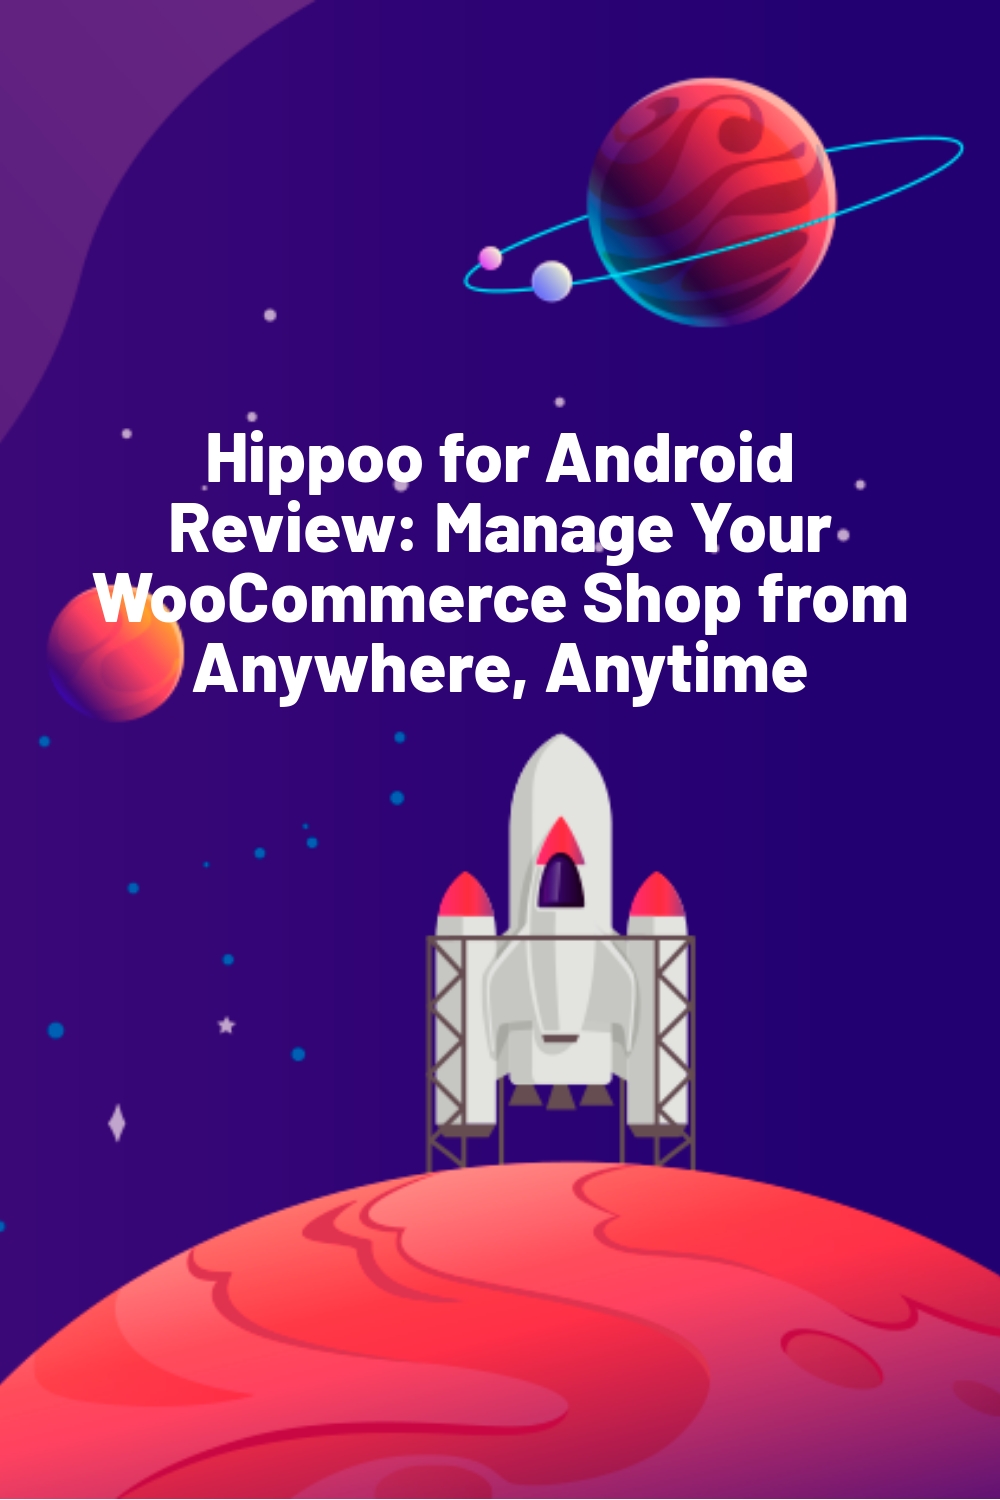 Hippoo for Android Review: Manage Your WooCommerce Shop from Anywhere, Anytime